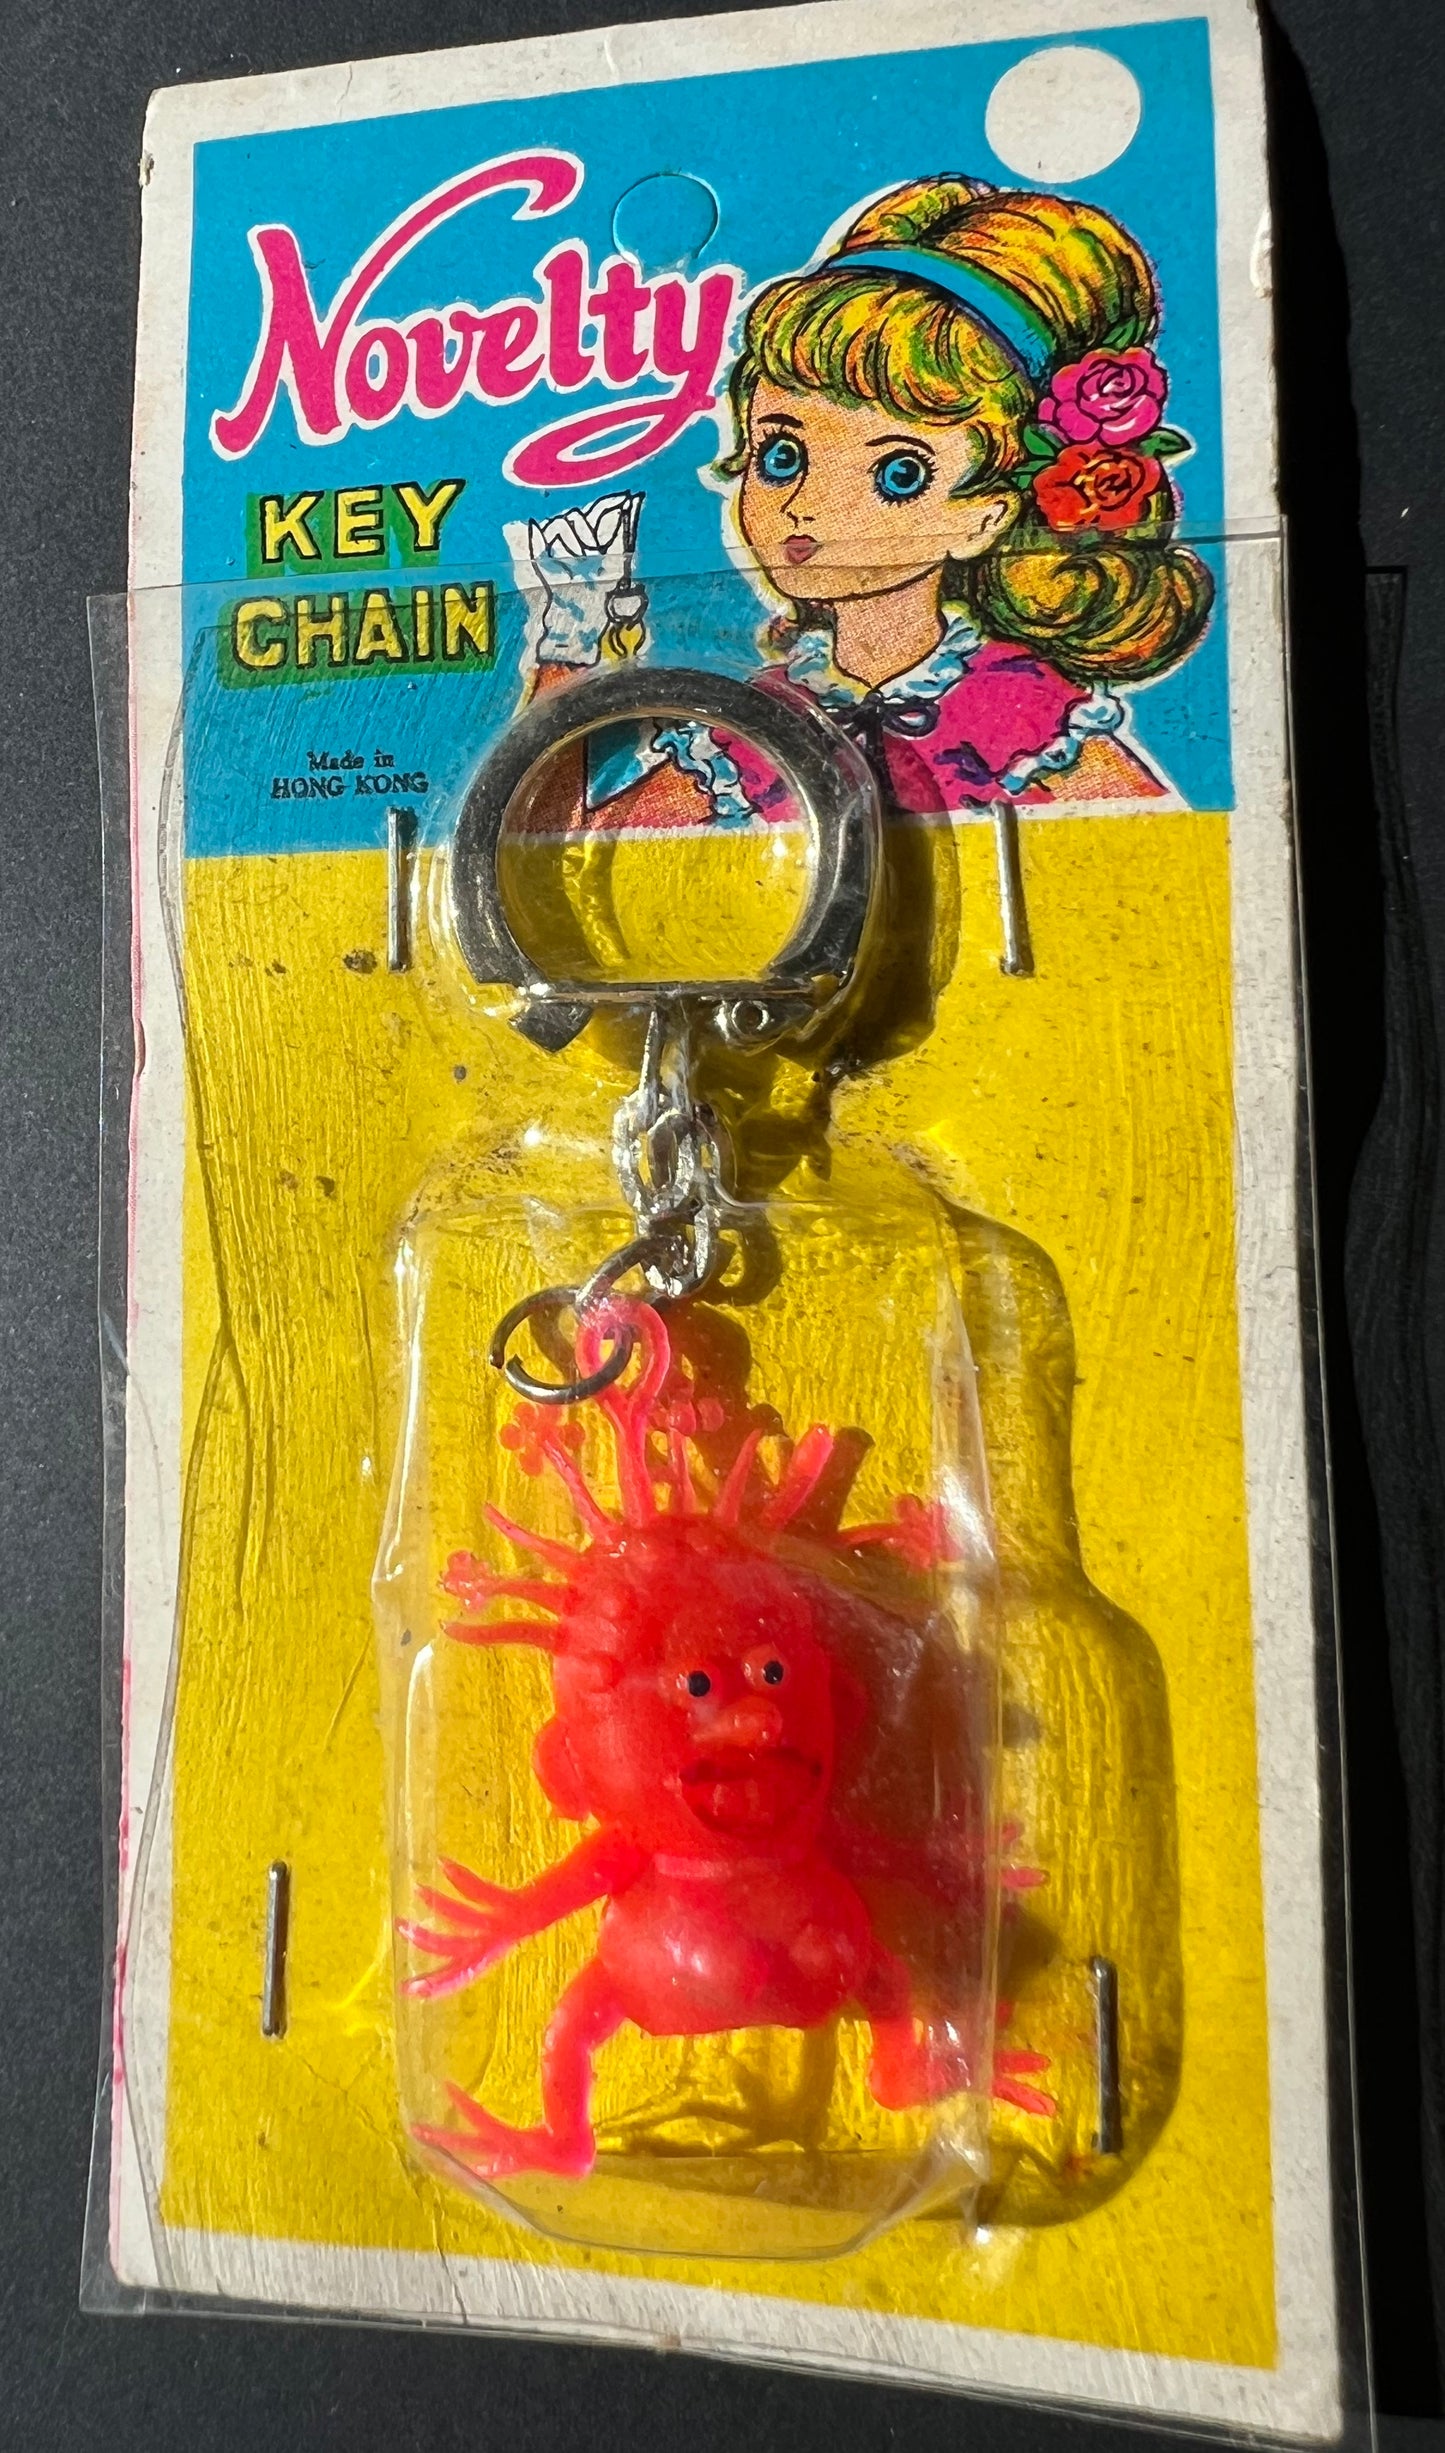 Scary Rubber Monster Key Rings Made in Hong Kong